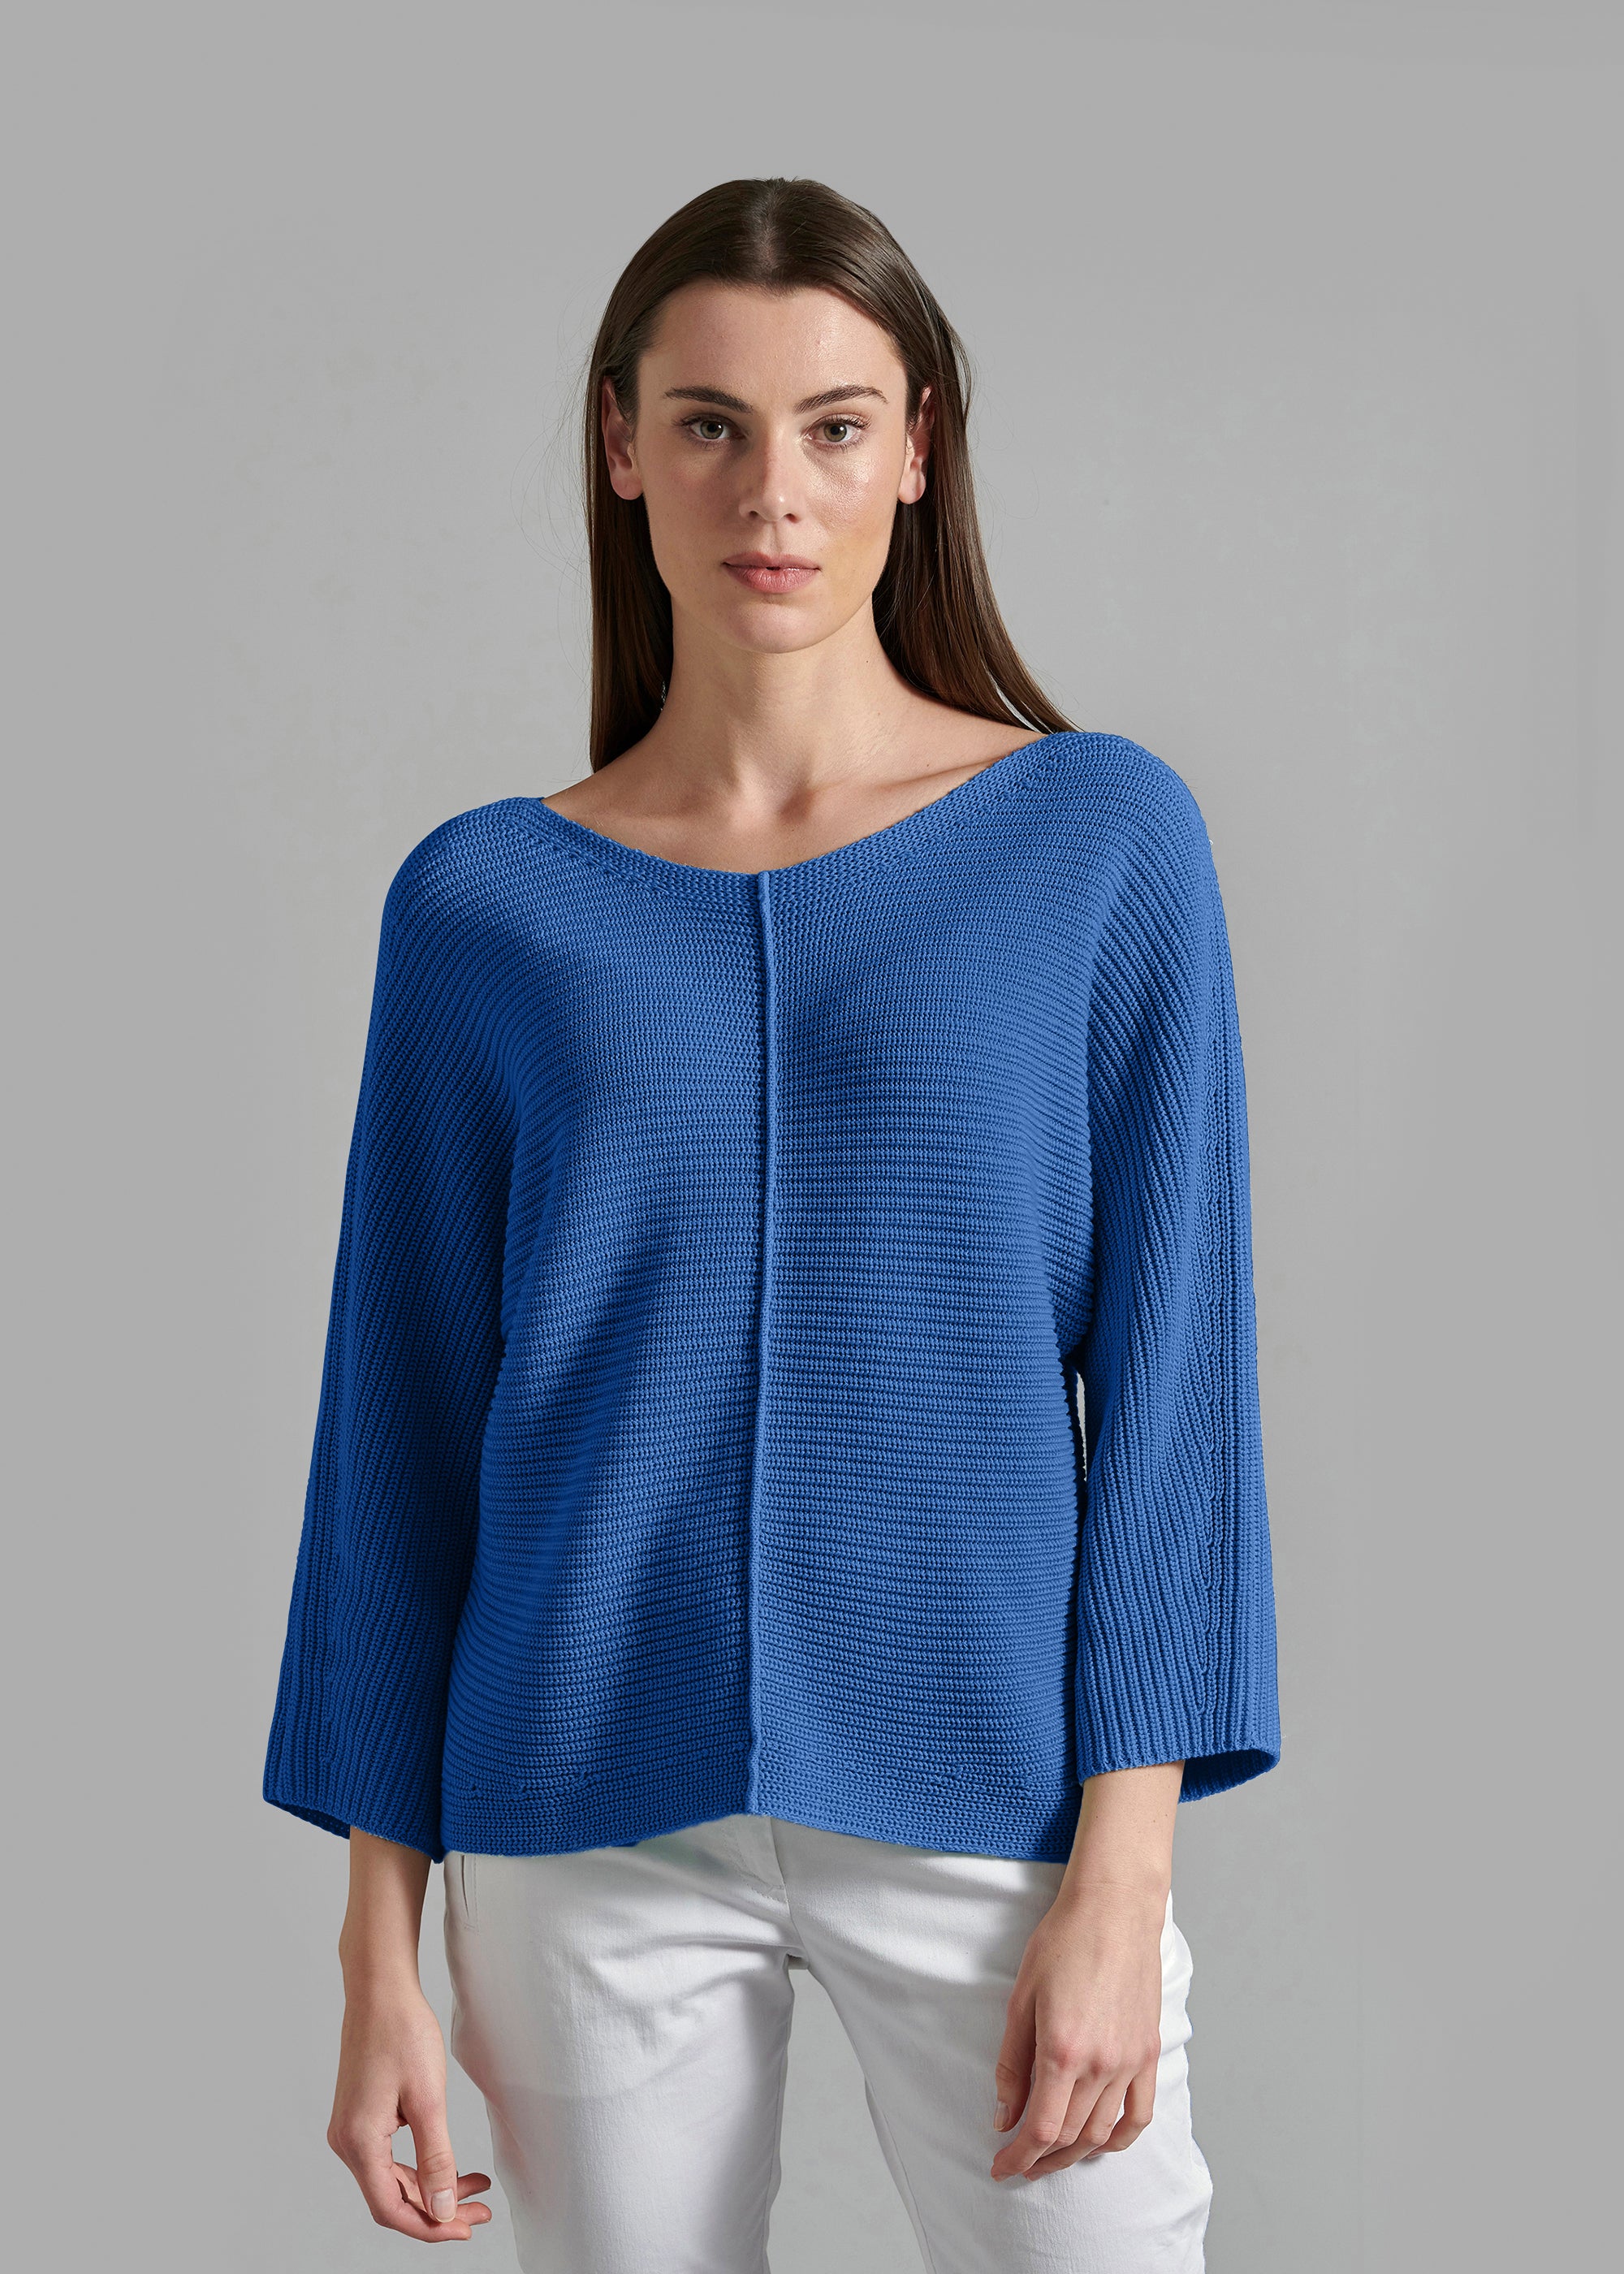 Pullover Modell "Cleo"